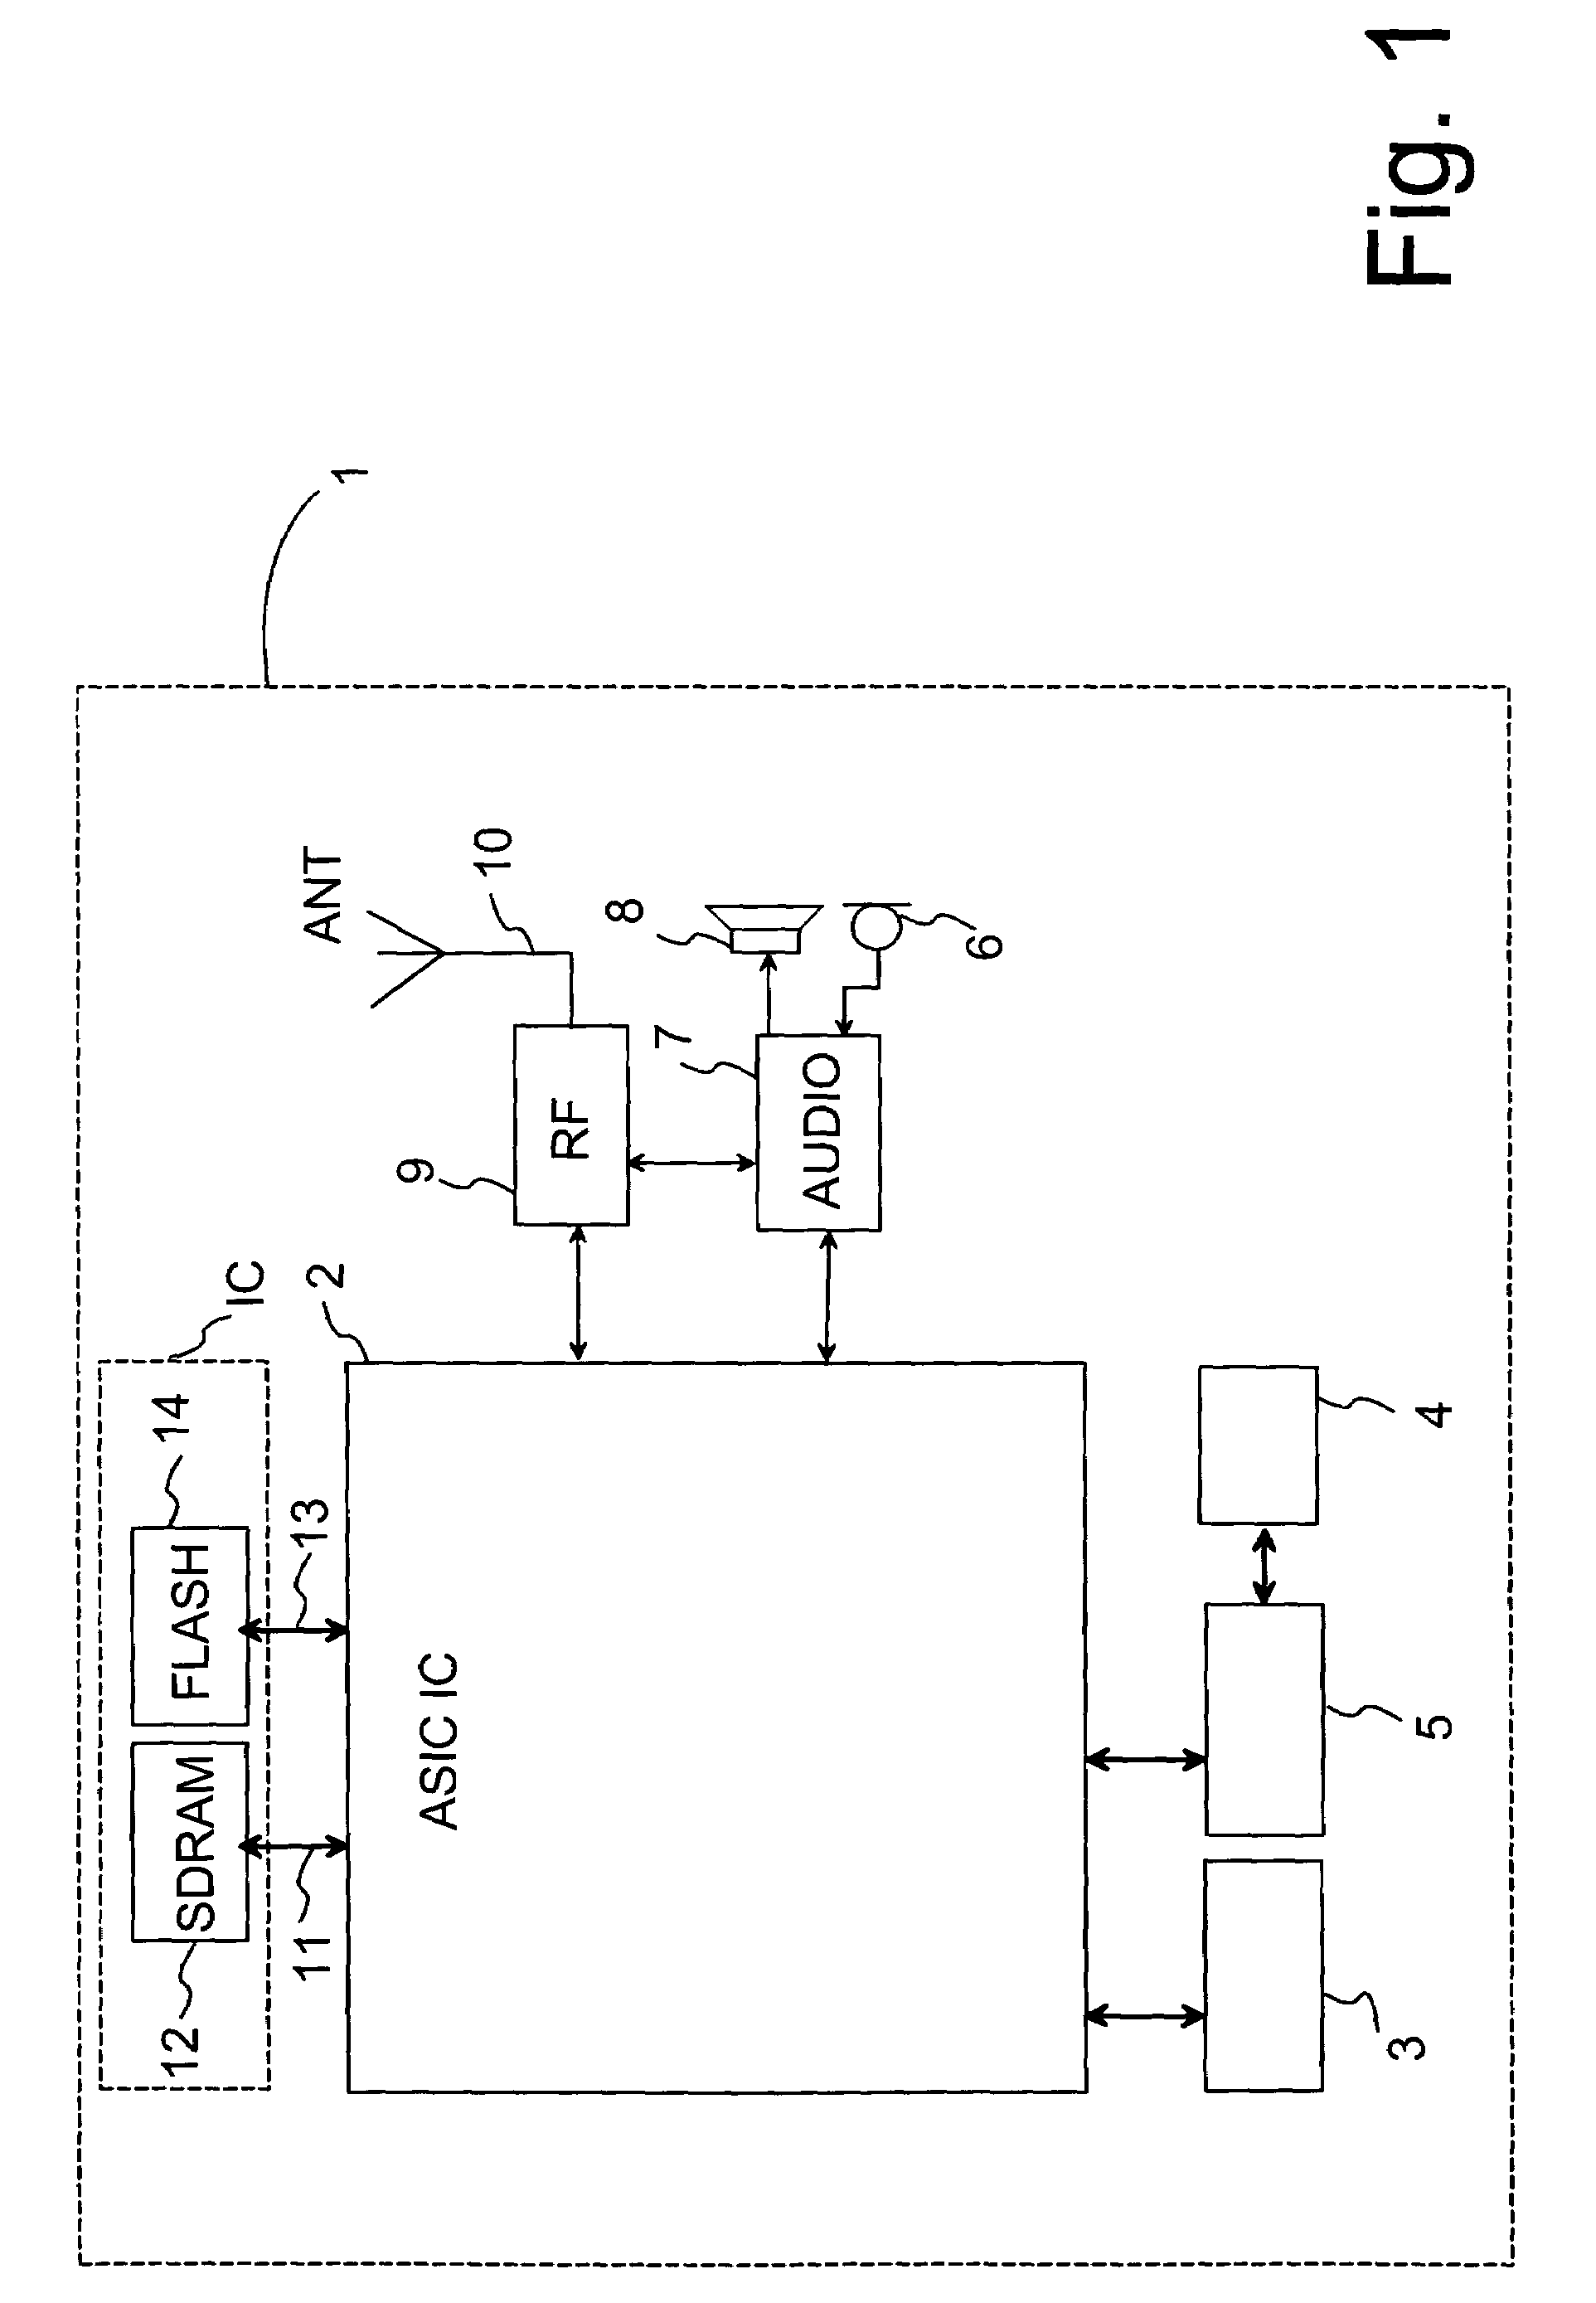 Integrated circuit package